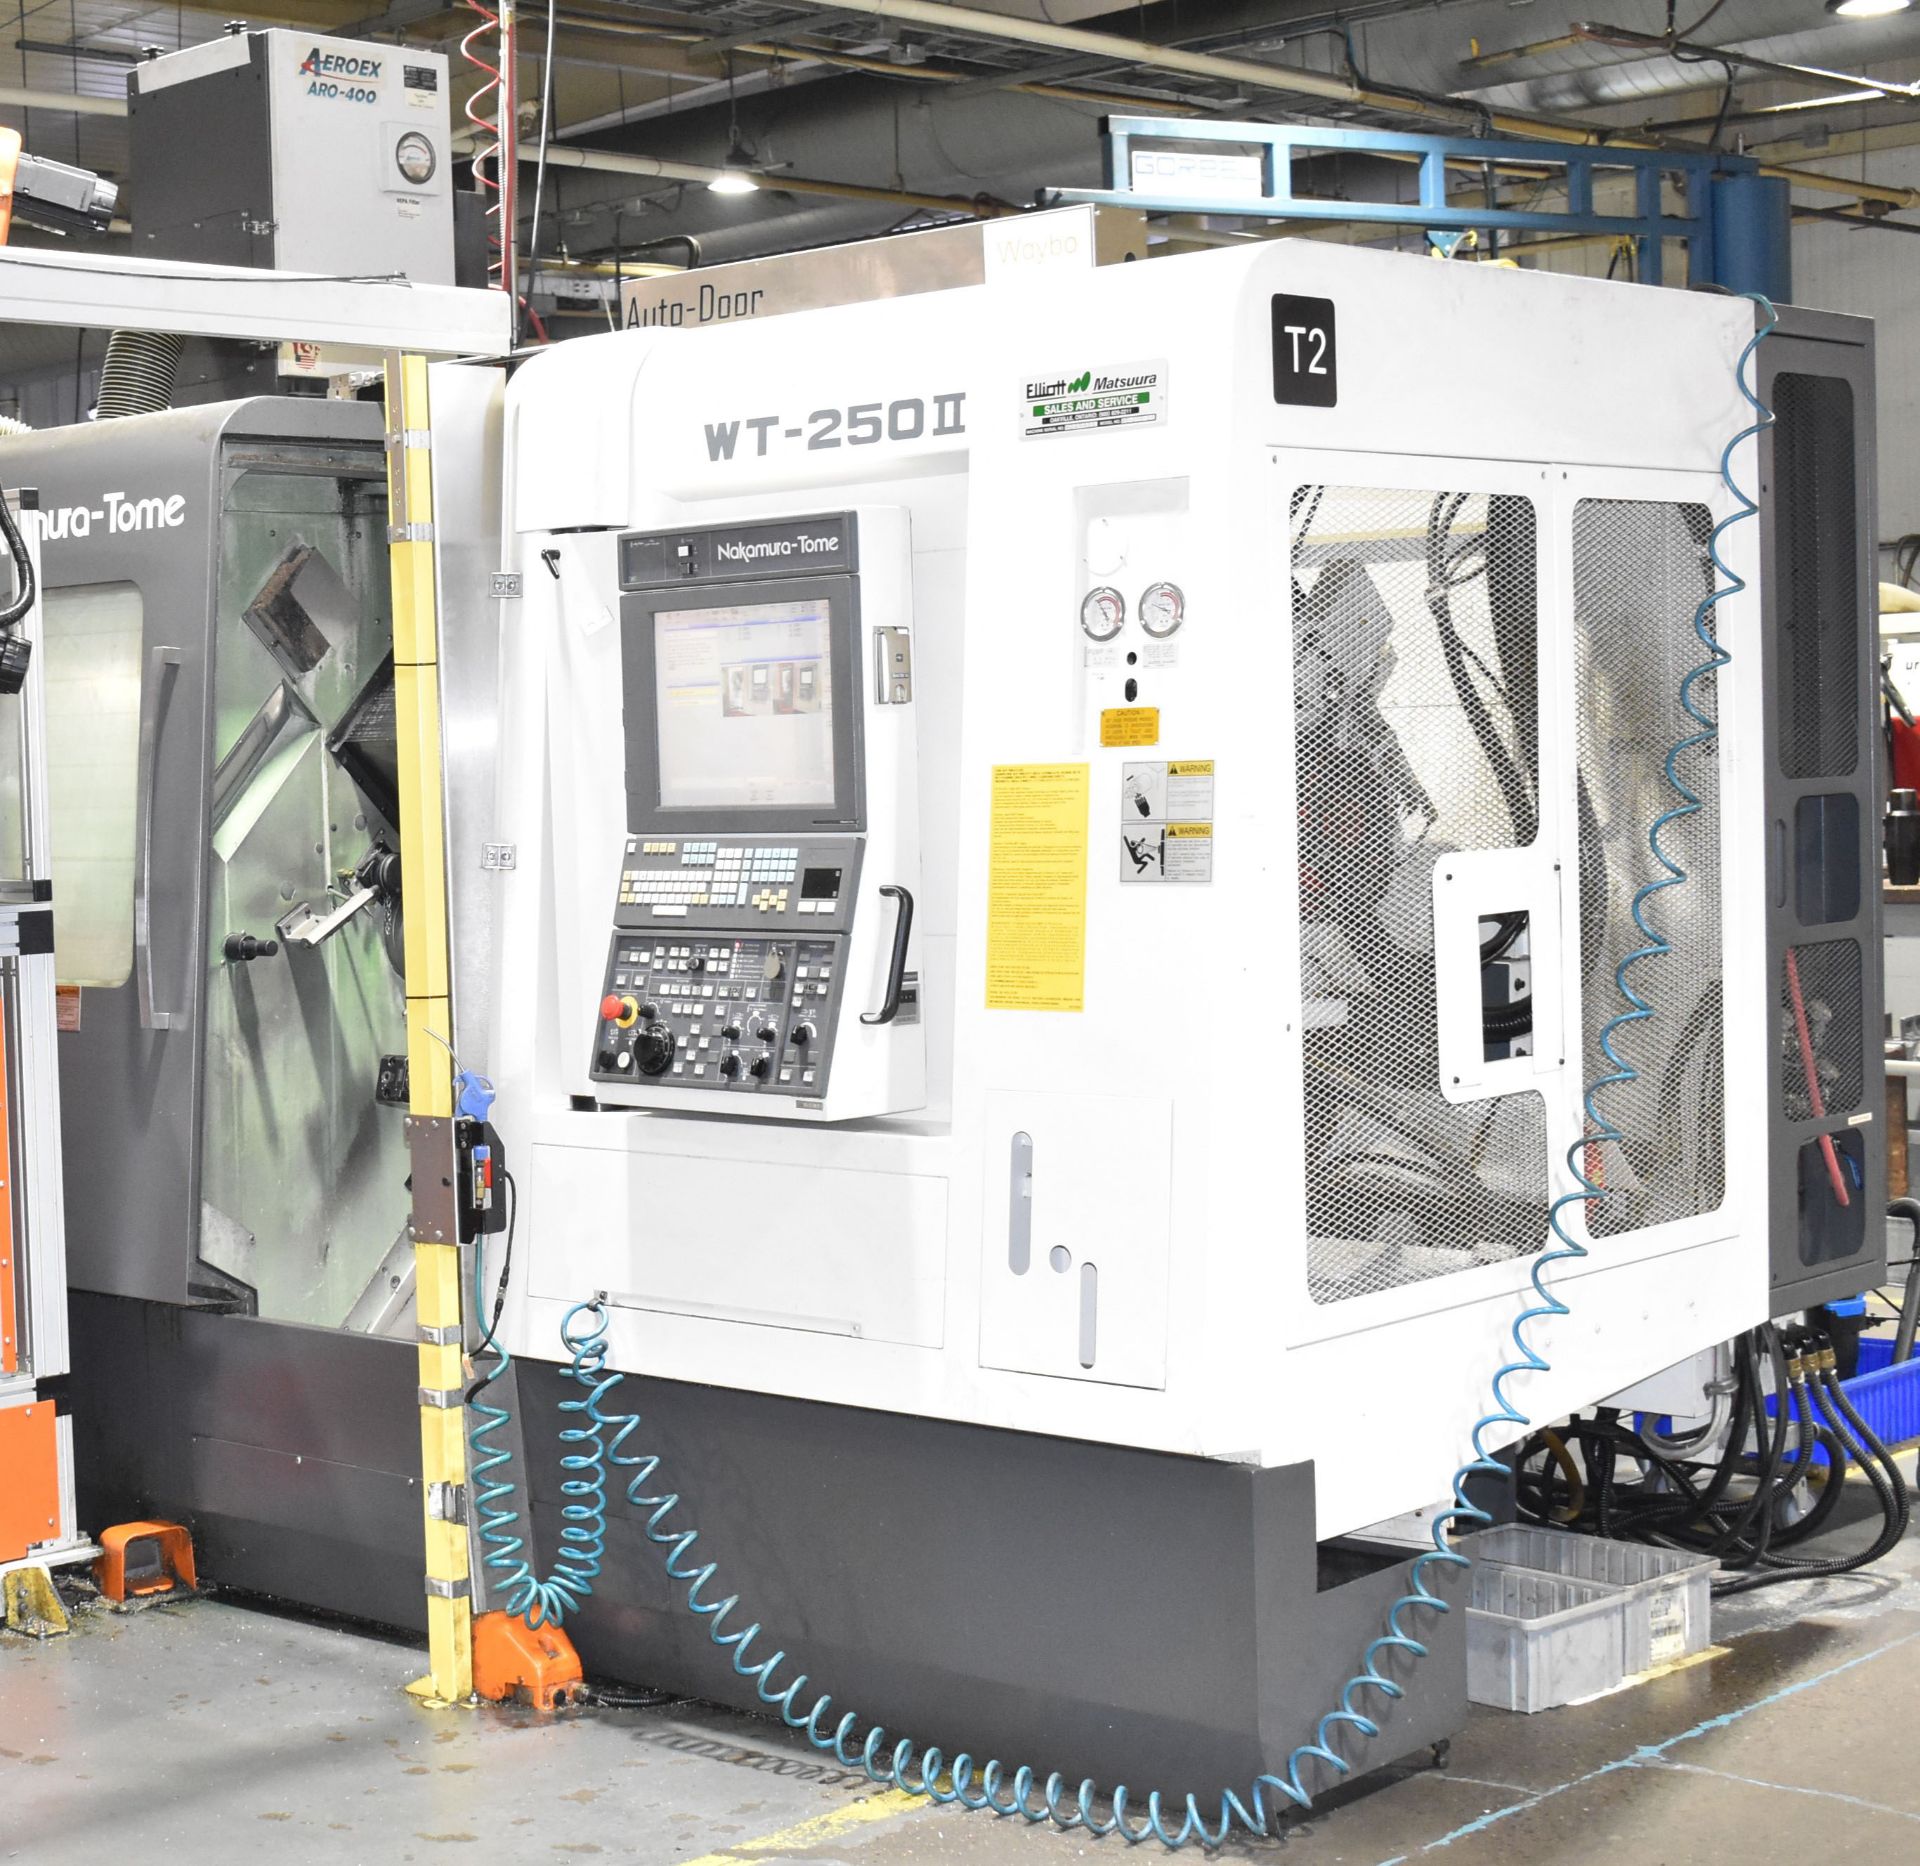 NAKAMURA-TOME WT-250 II MULTI-AXIS OPPOSED SPINDLE AND TWIN TURRET CNC MULTI-TASKING CENTER WITH